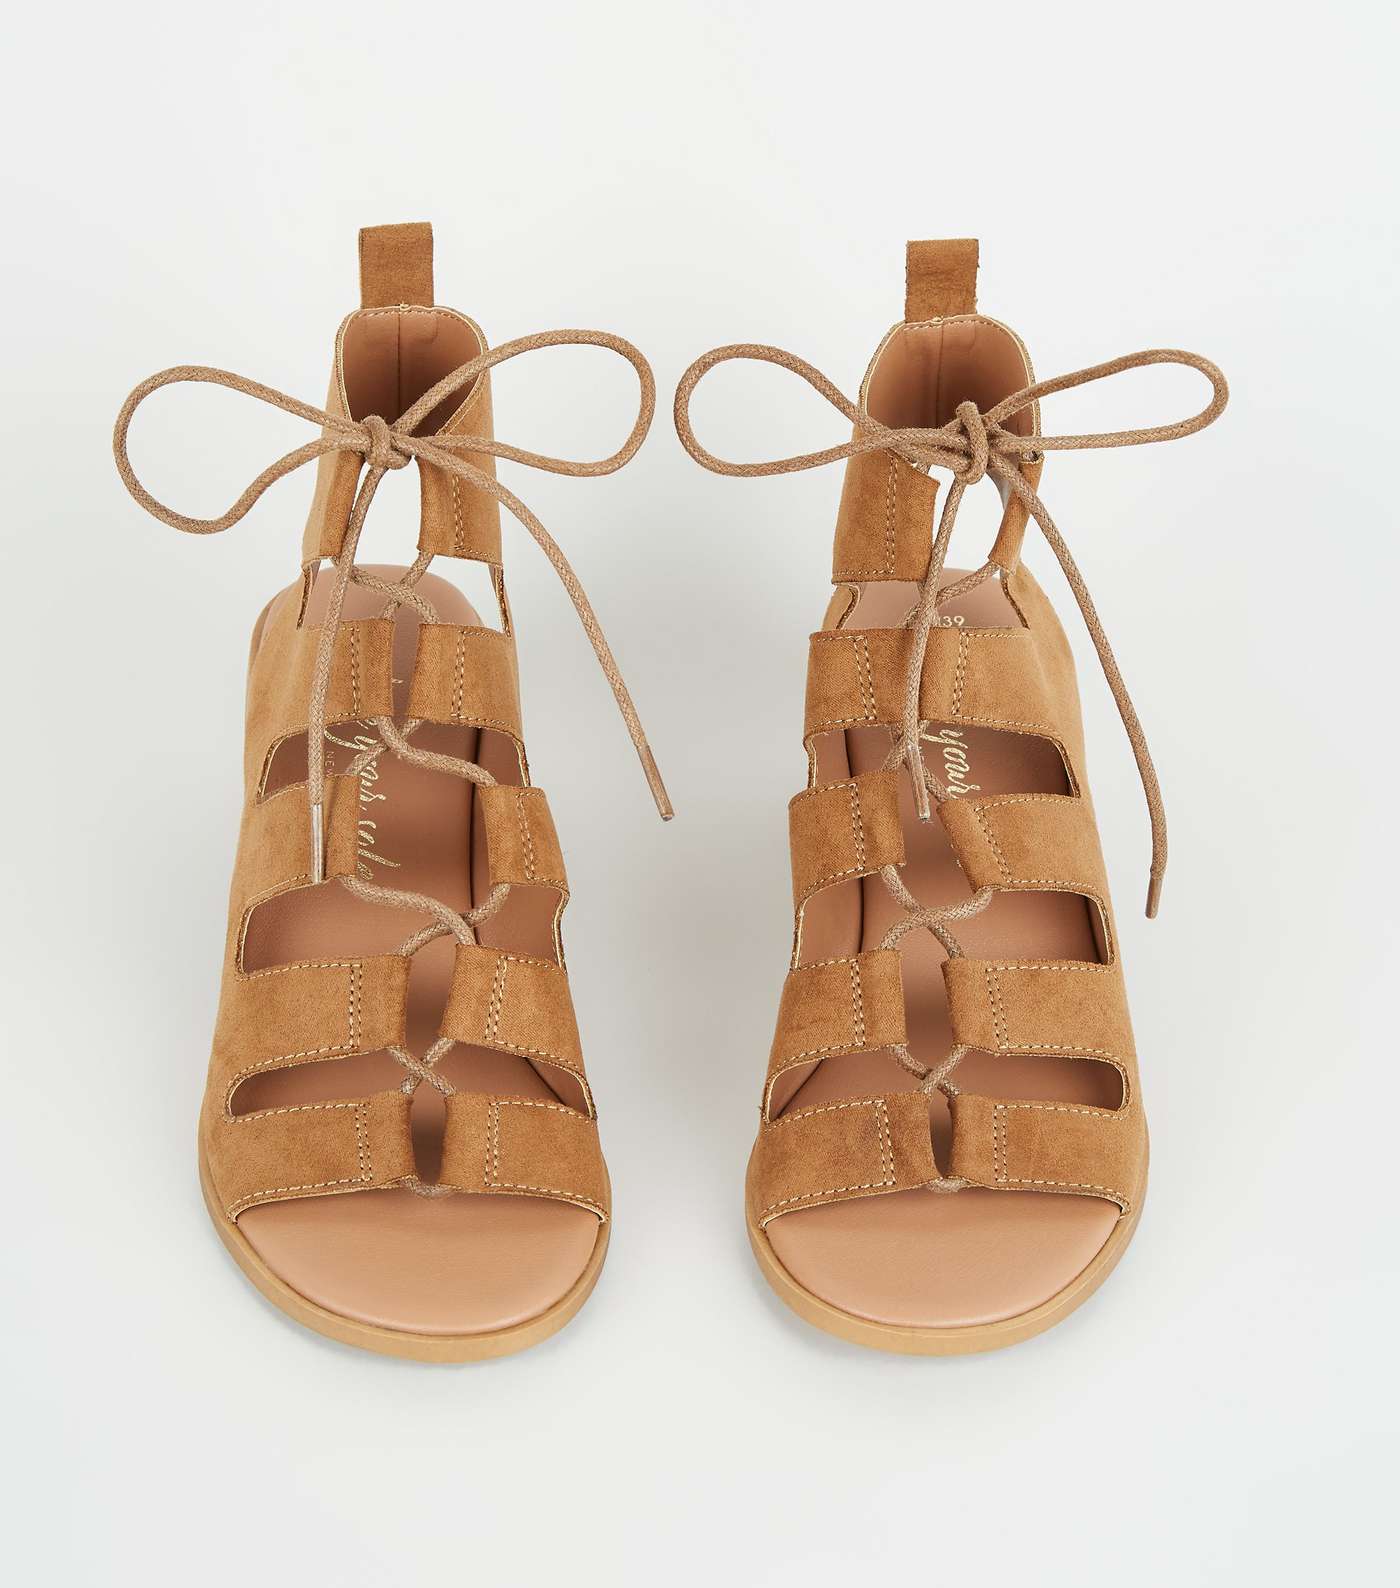 Tan Ghillie Lace Up Low Heel Sandals Image 4